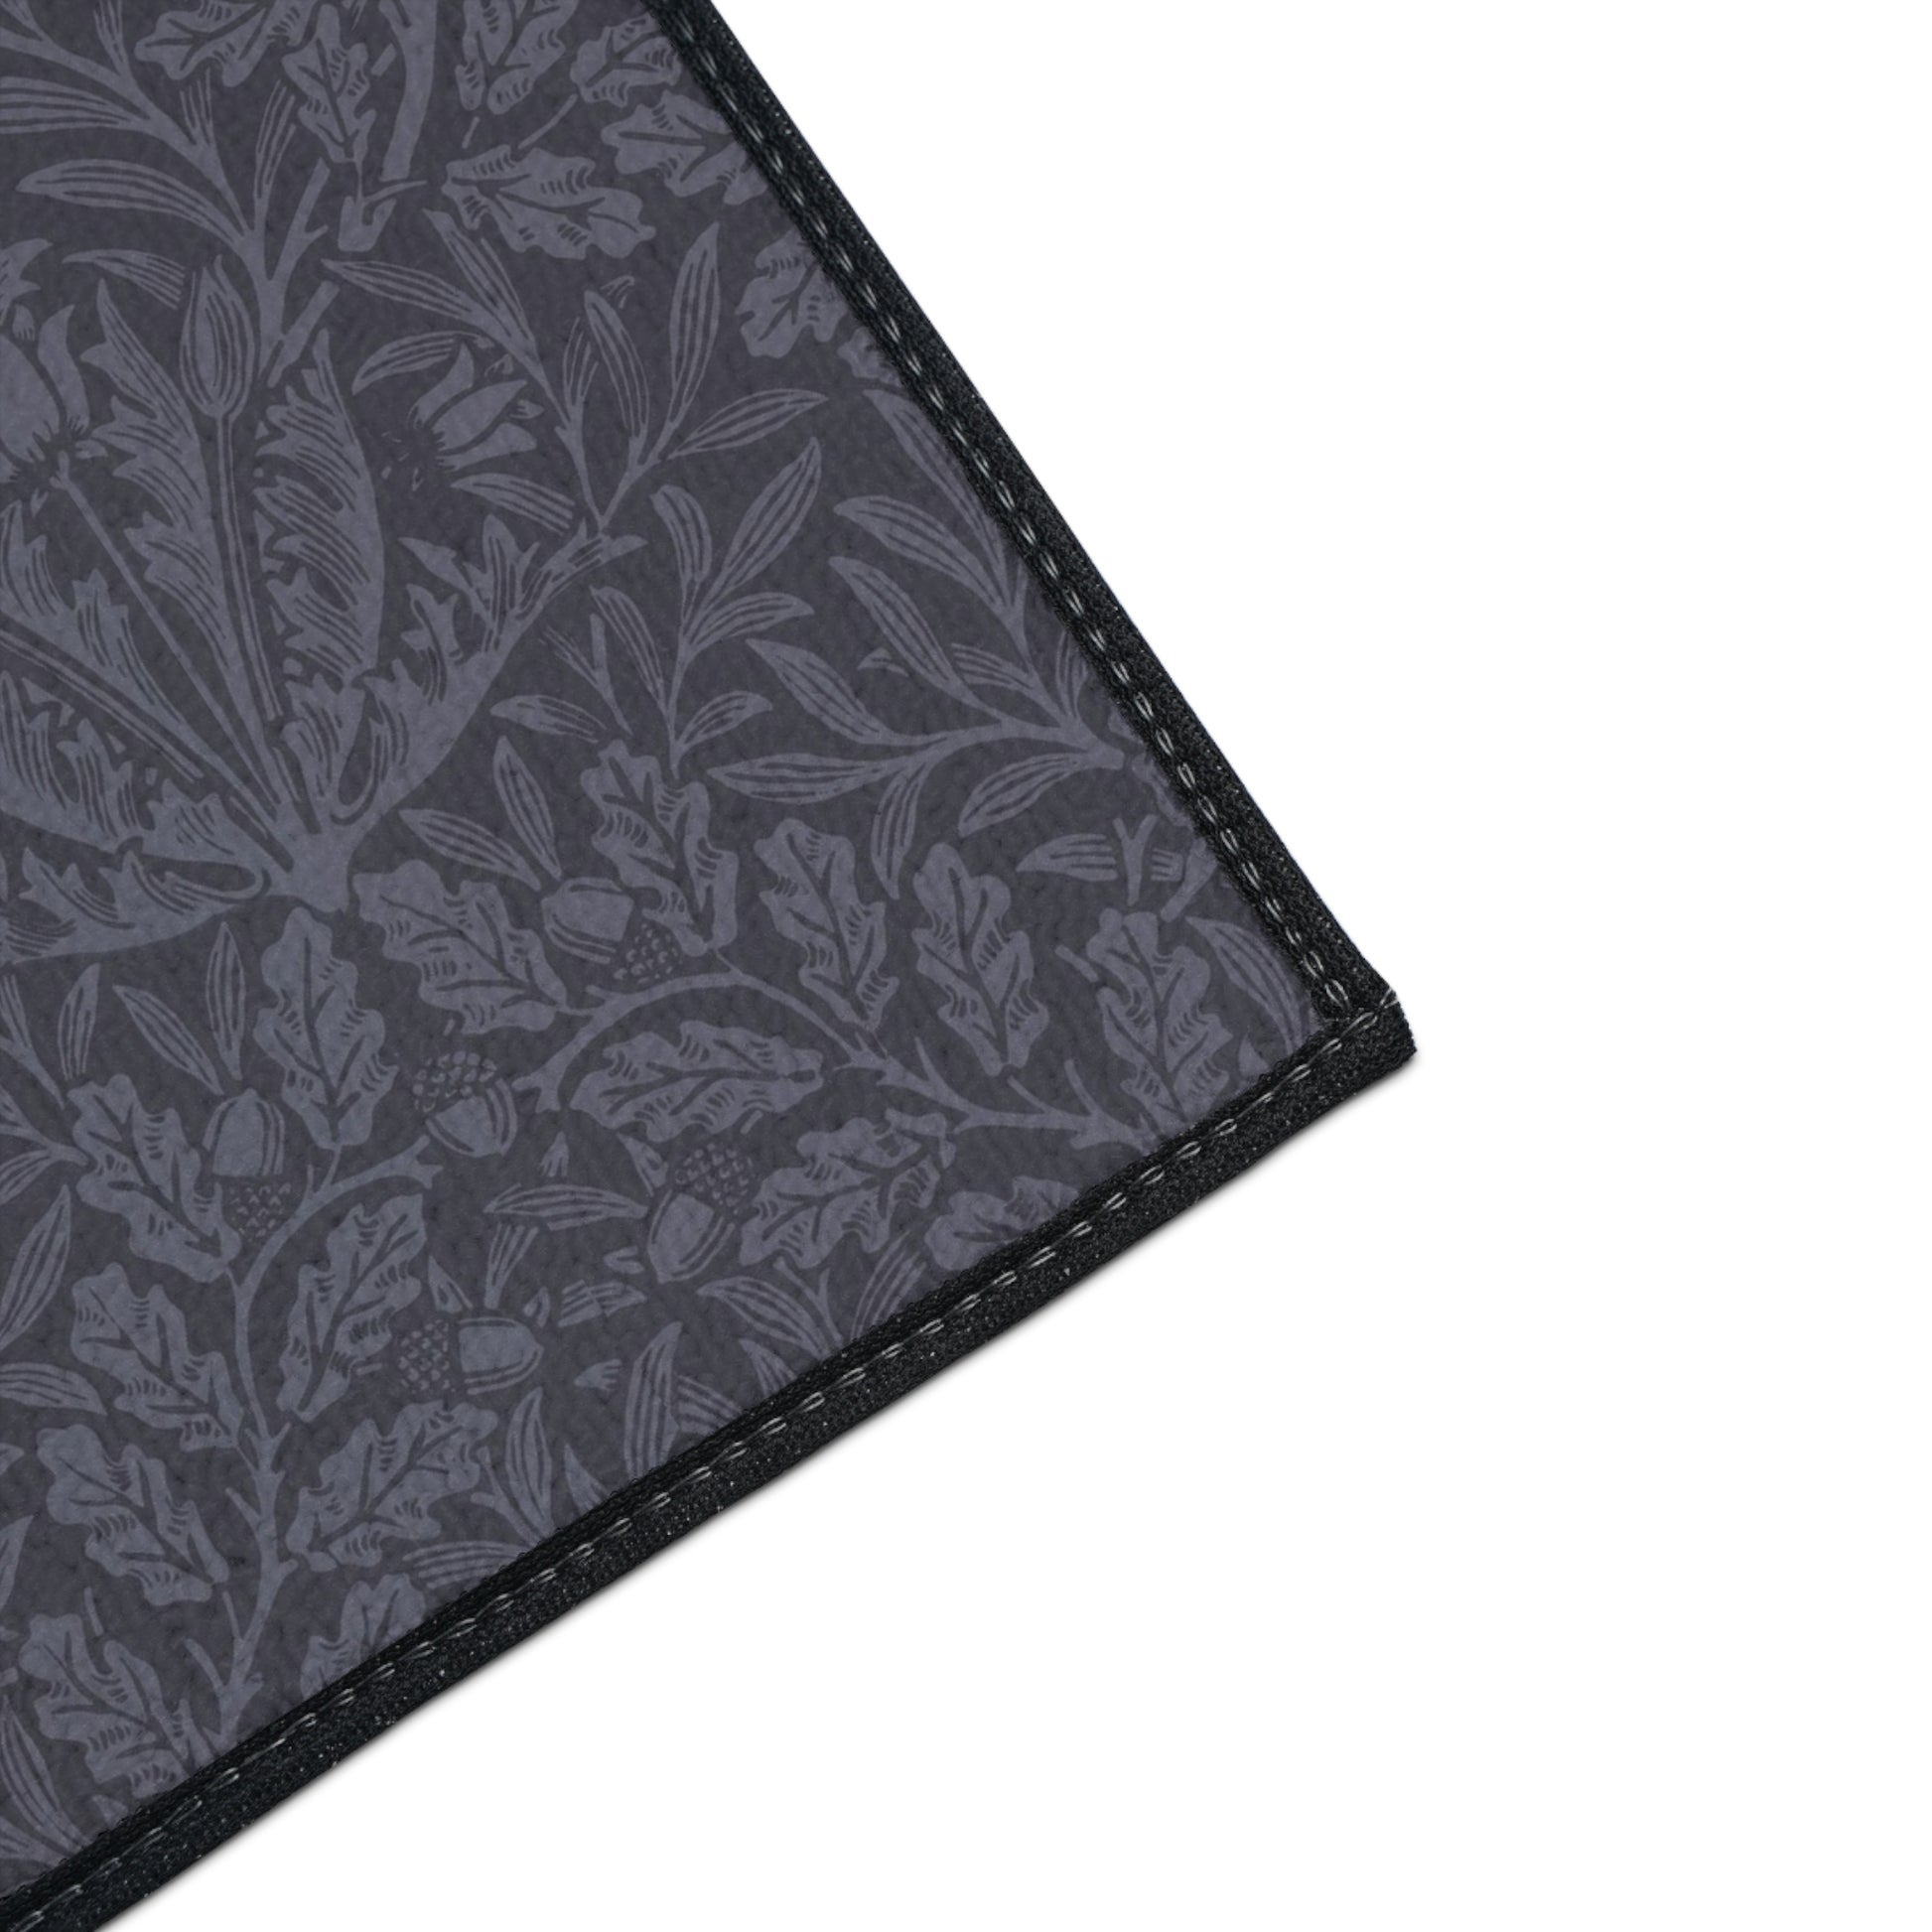 william-morris-co-heavy-duty-floor-mat-acorns-and-oak-leaves-collection-smoky-blue-14